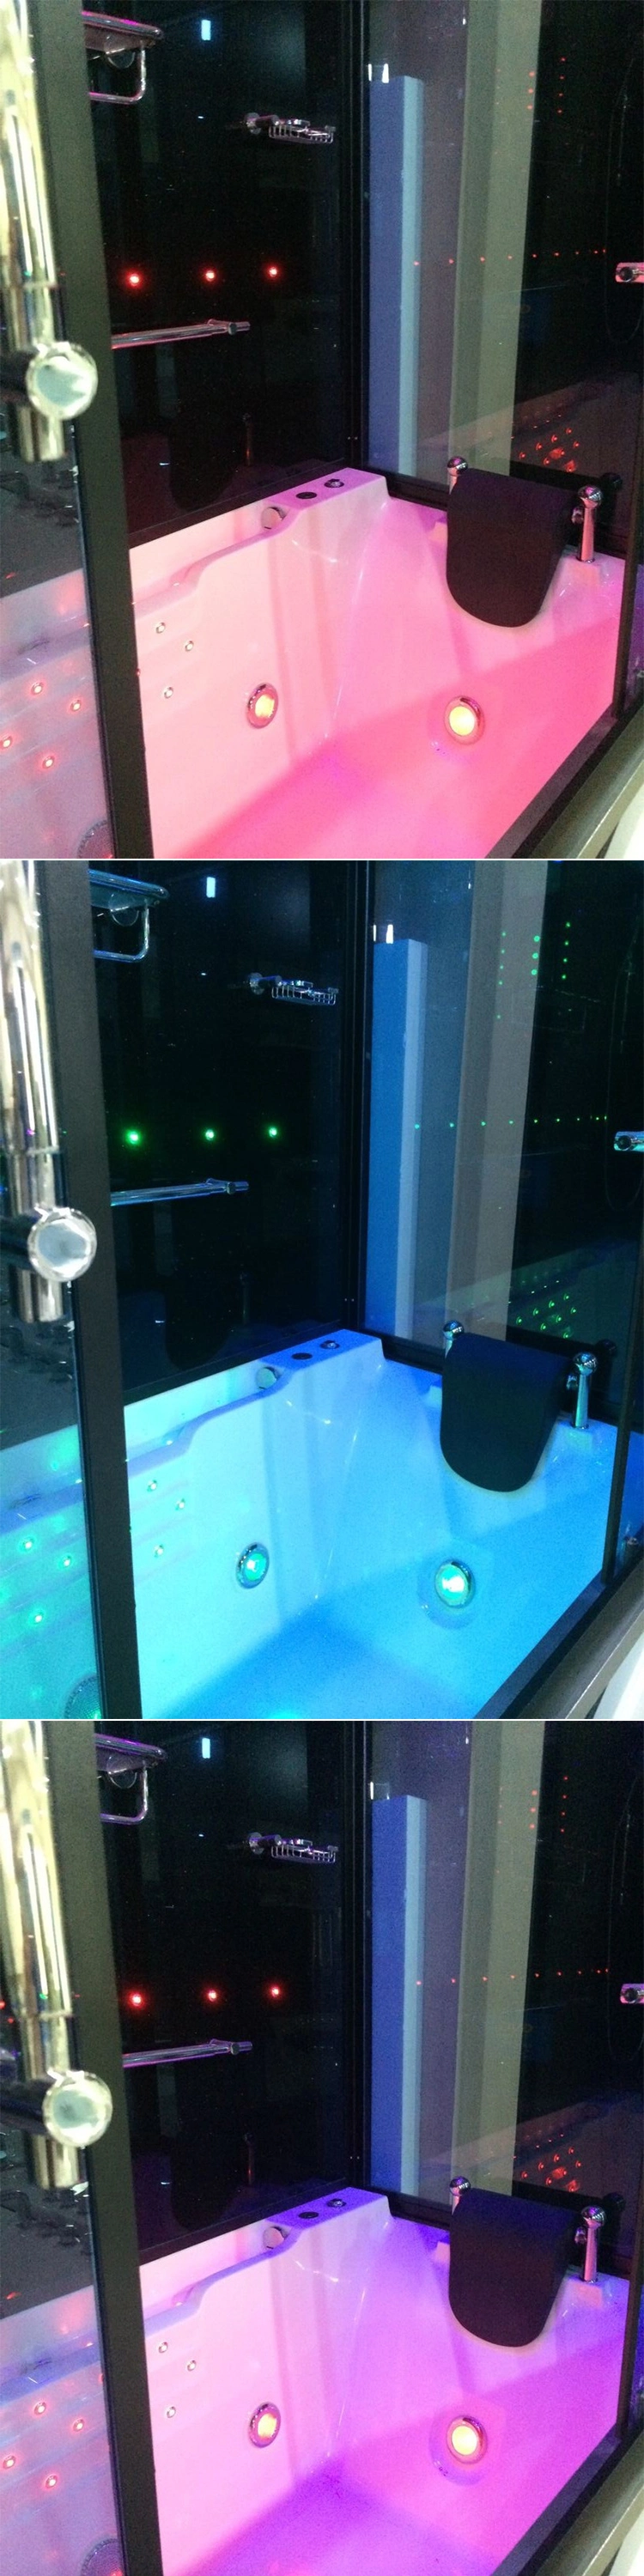 with LED Display and Massage Jets Steam Shower Whirlpool Tub